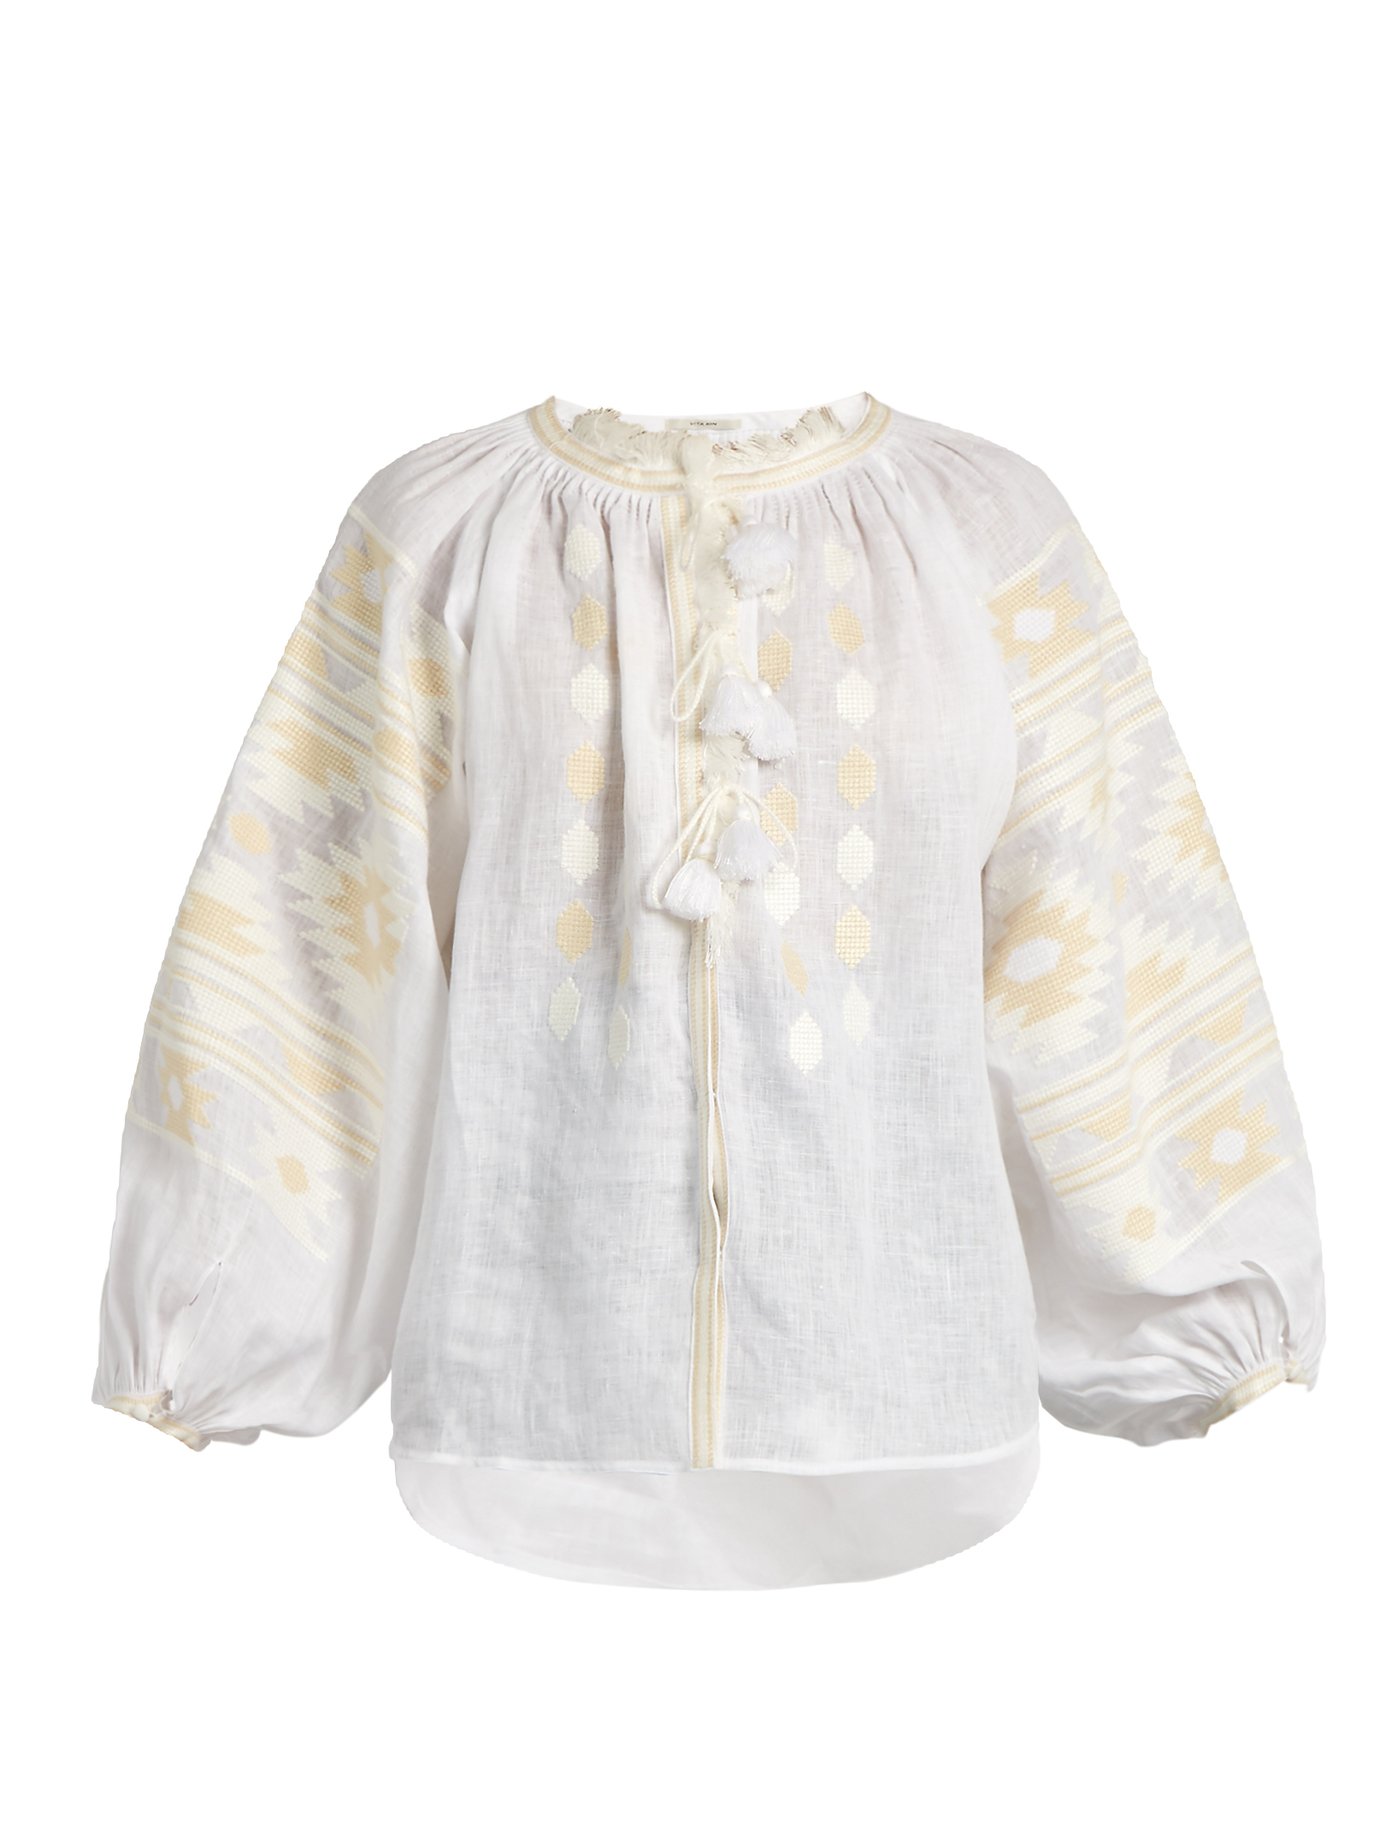 corporate-style-story-vita-kin-white-gold-embroidered-top-net-a-porter